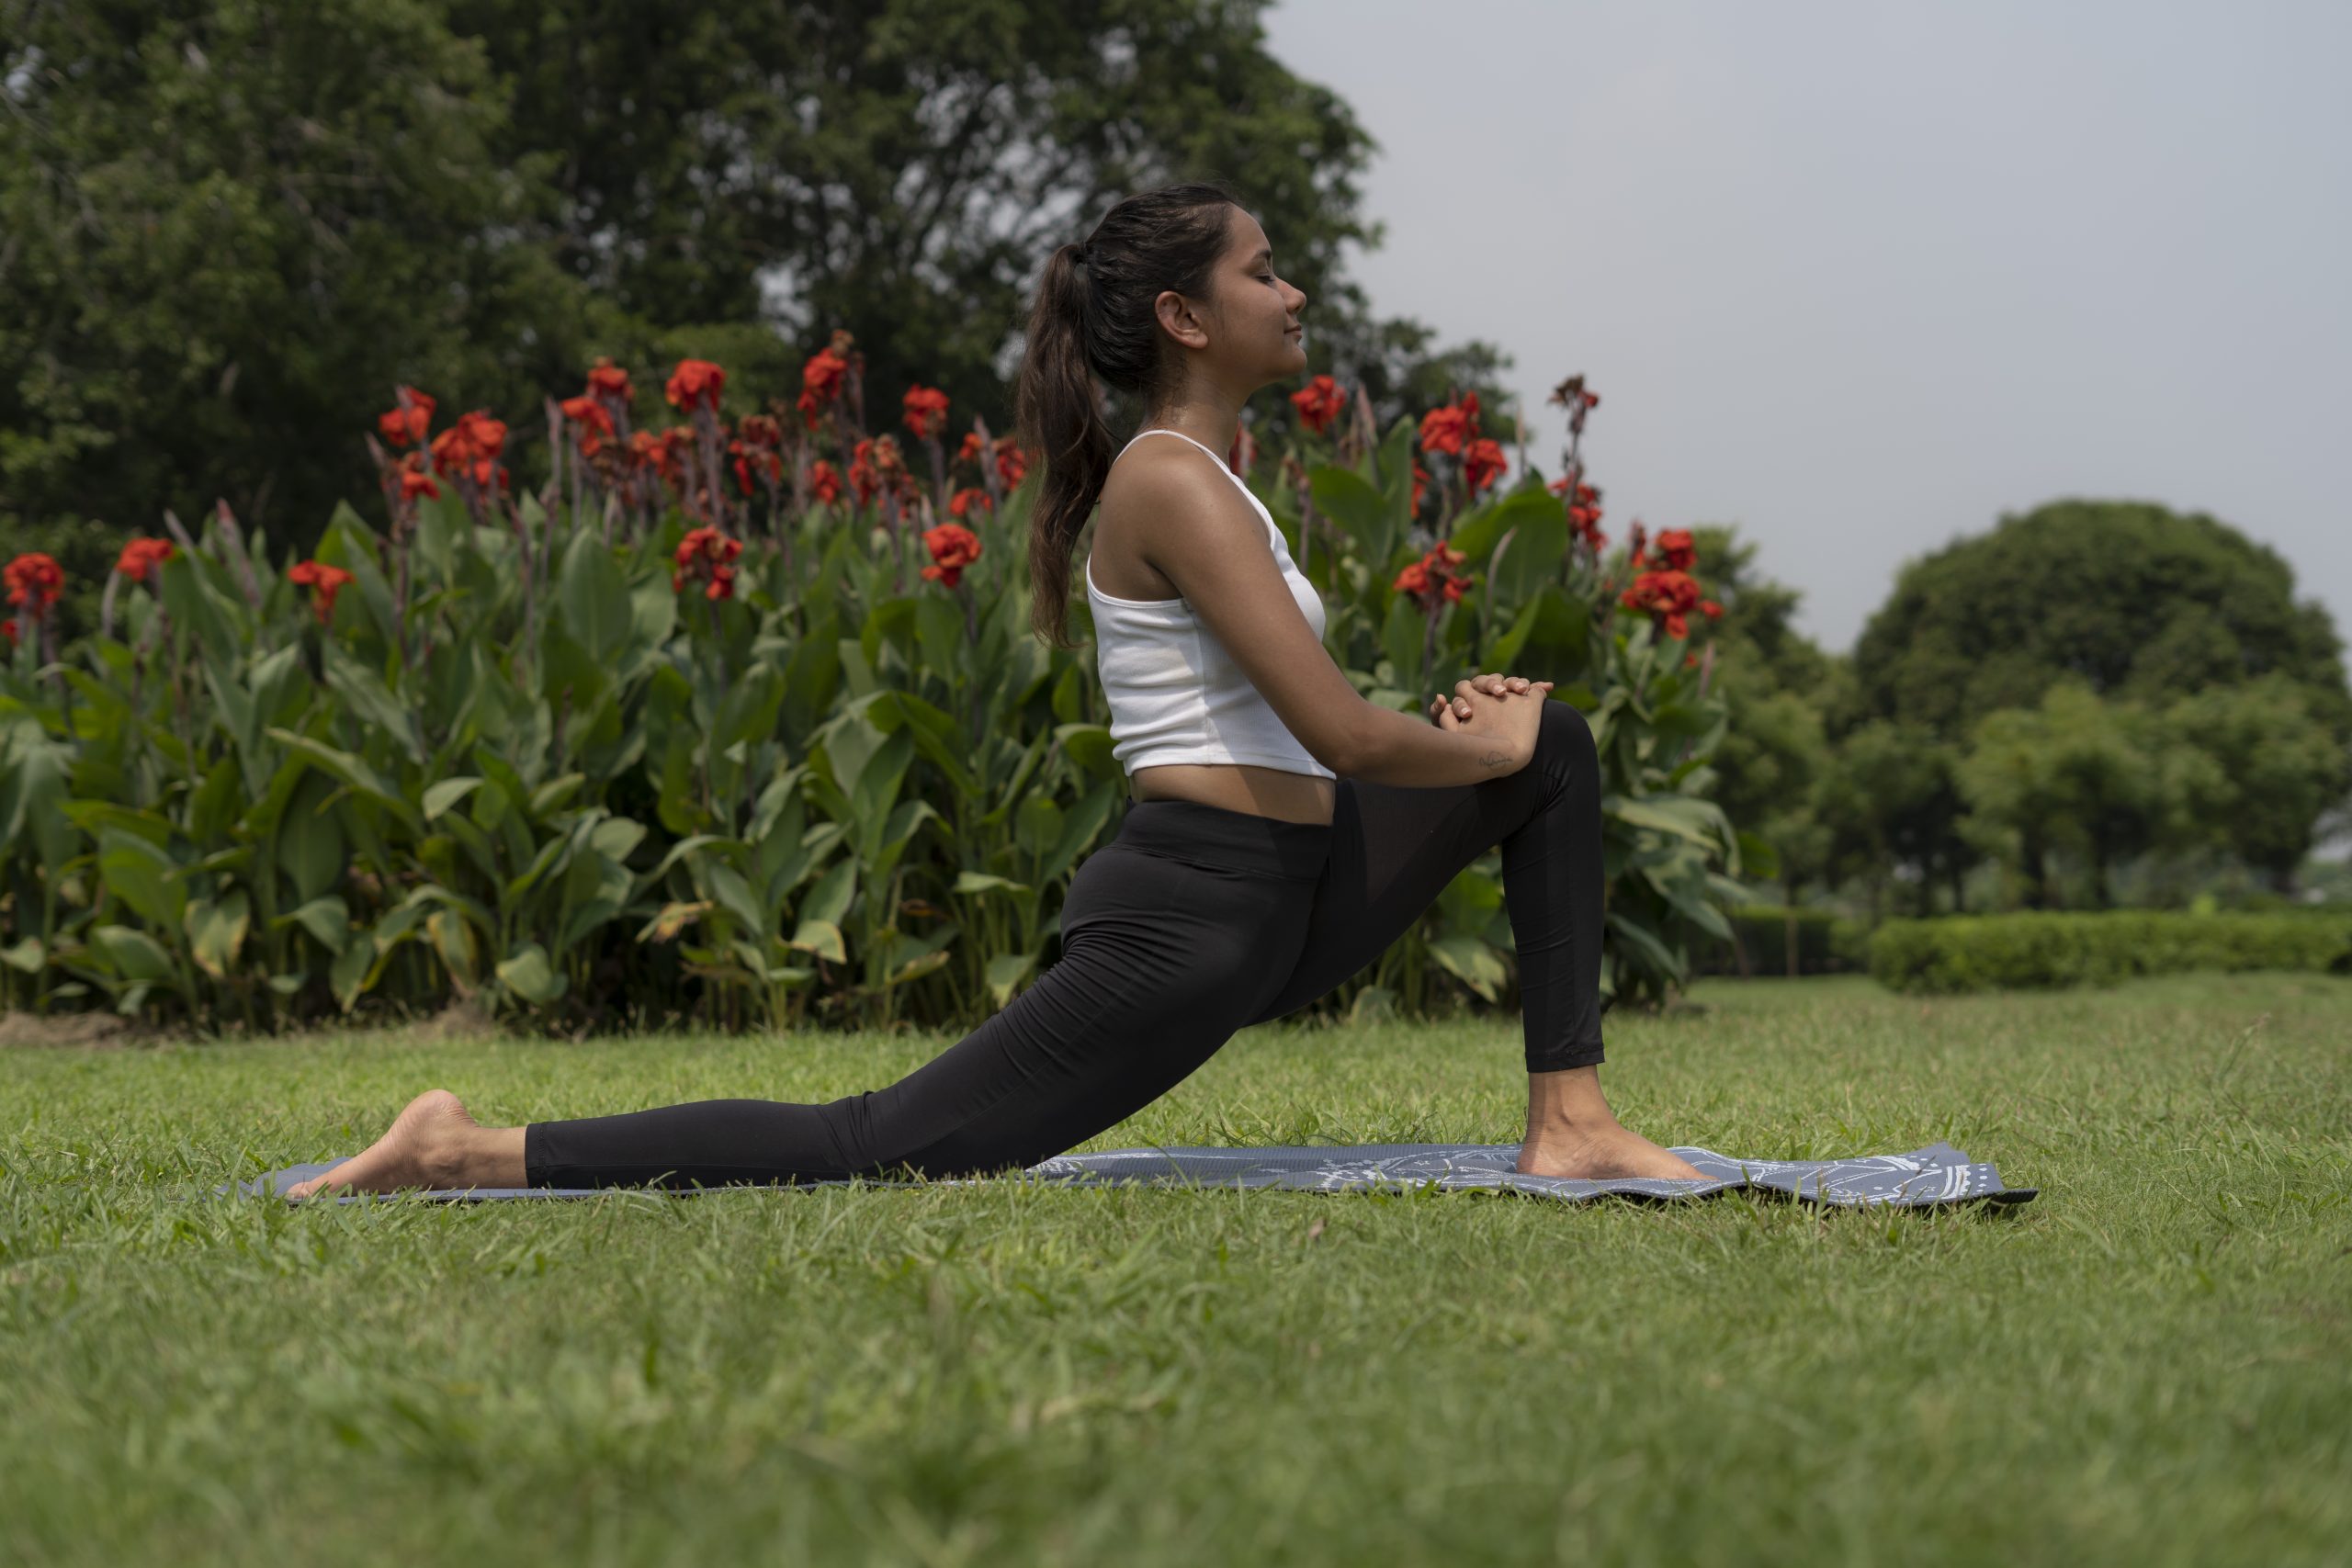 Yoga girl stretching in park